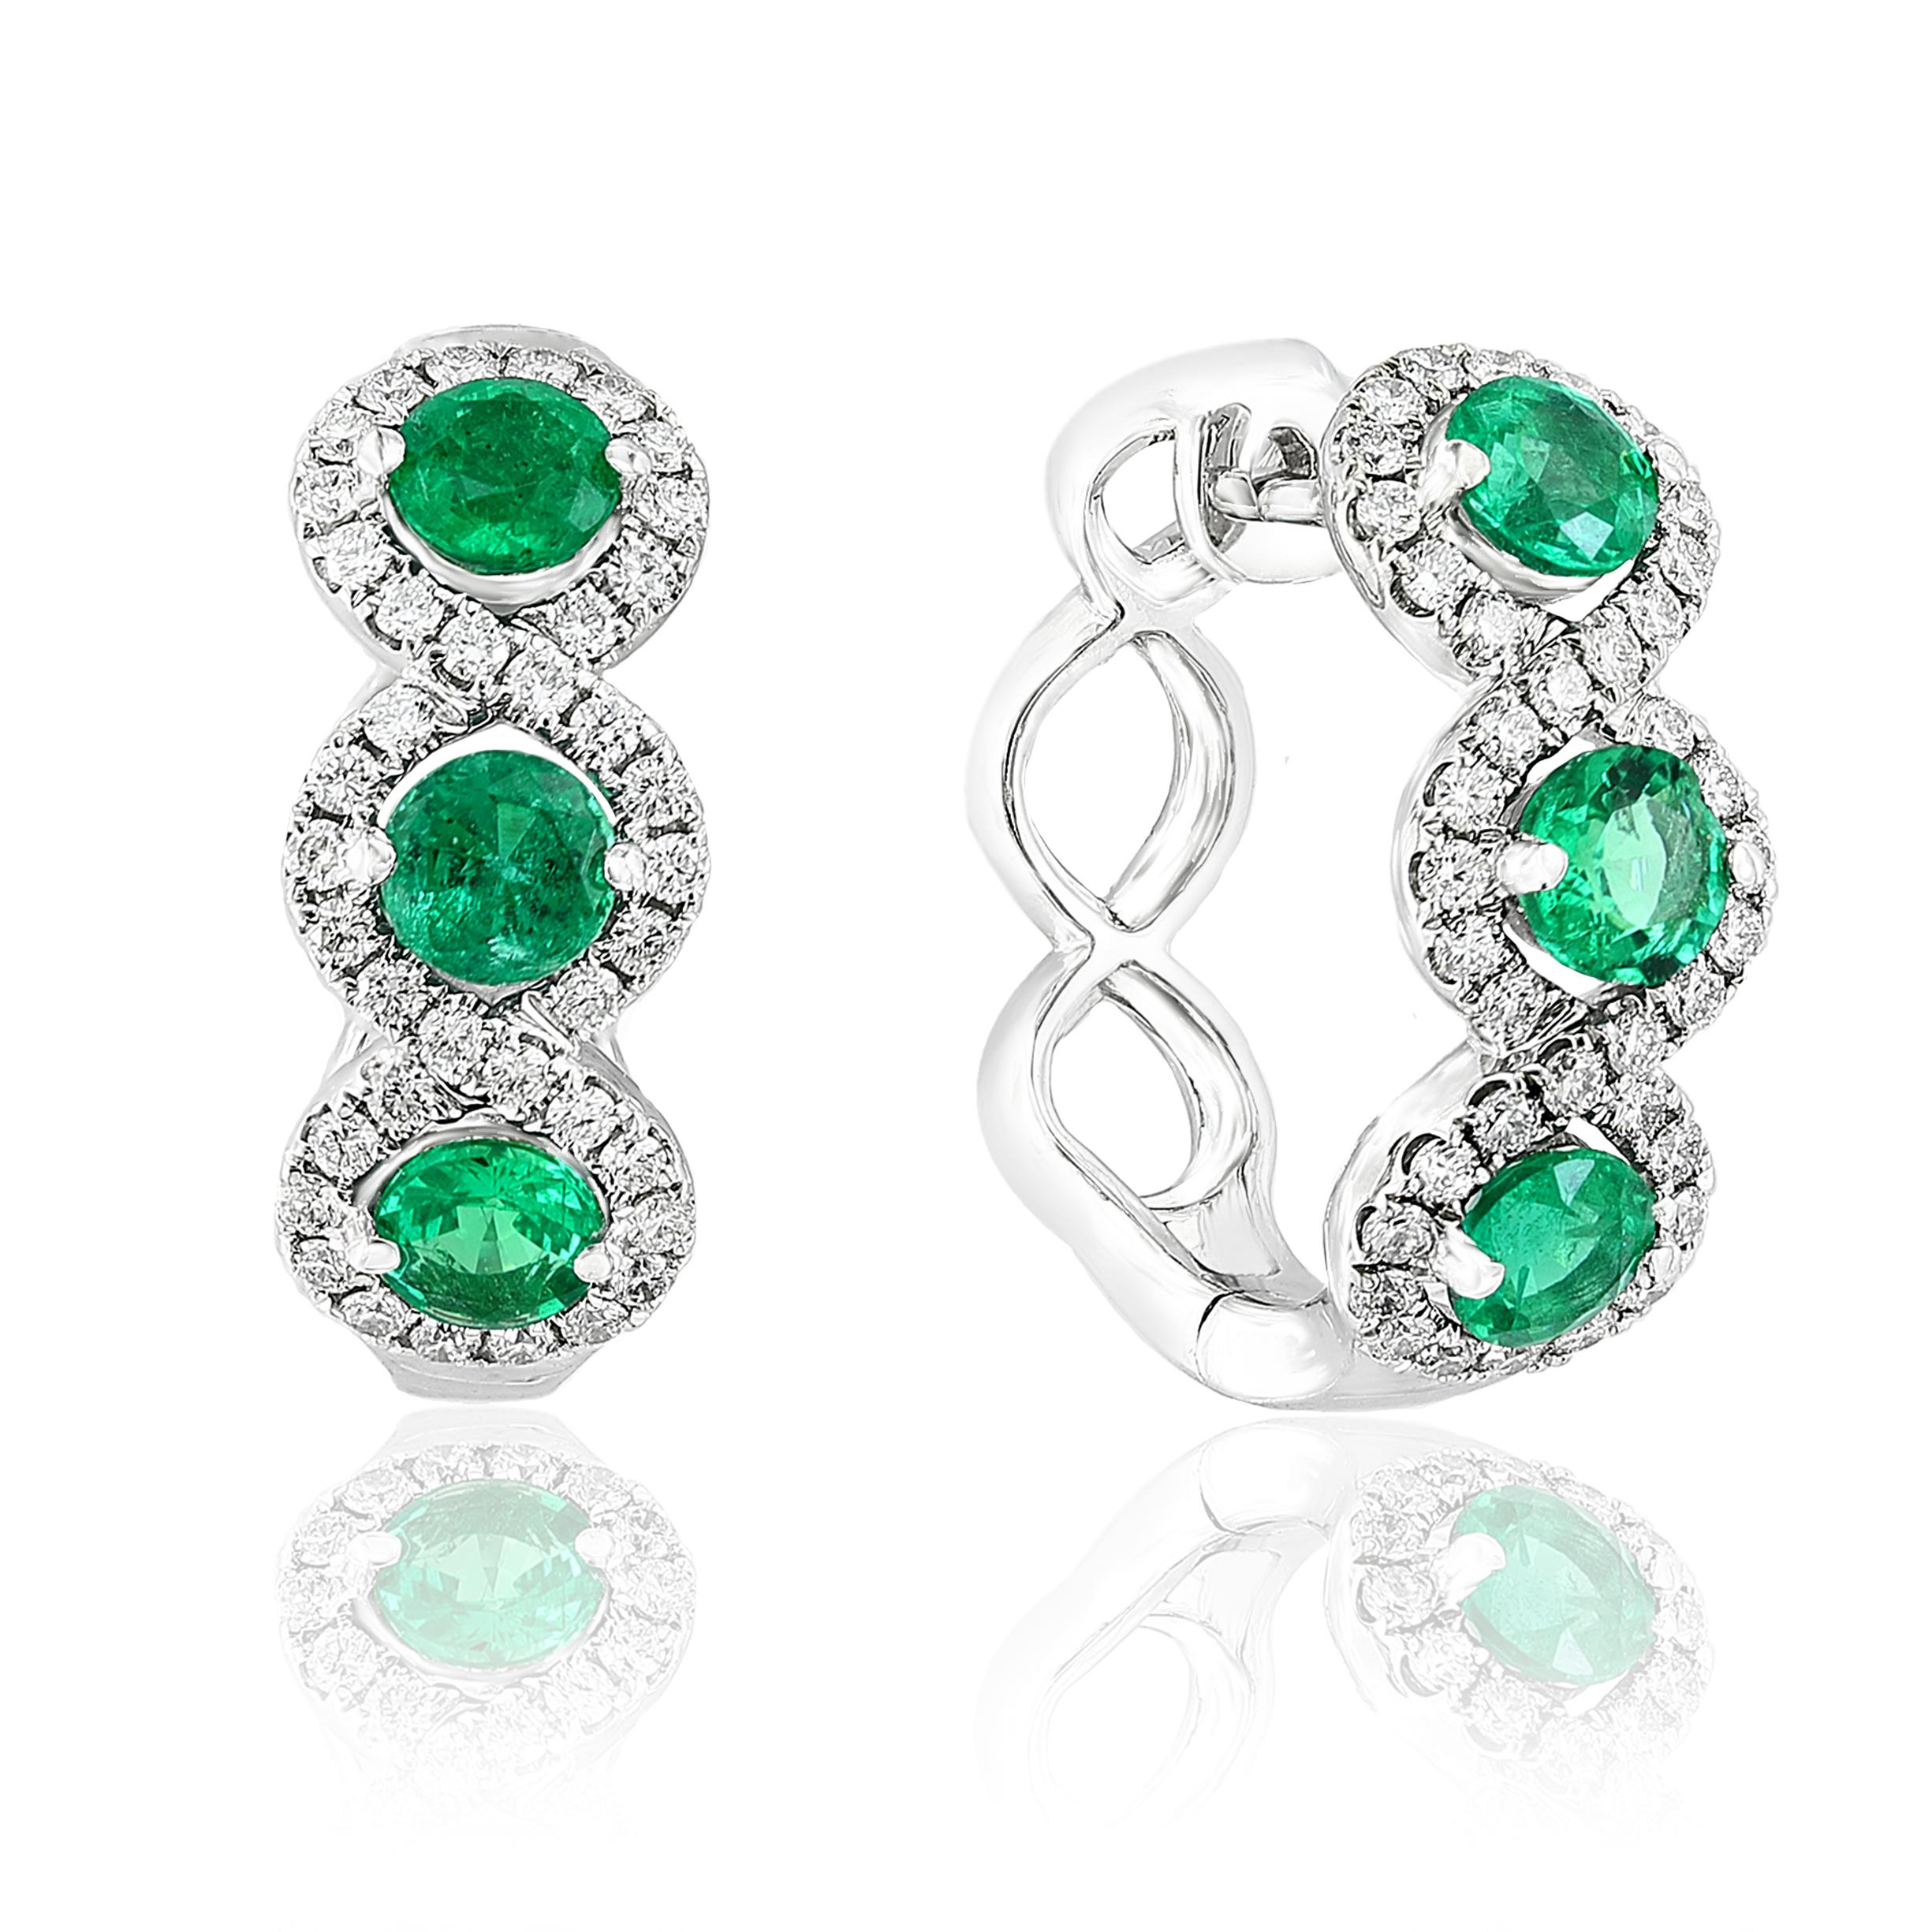 Modern 1.72 Carat Round Cut Emerald and Diamond Hoop Earrings in 18K White Gold For Sale